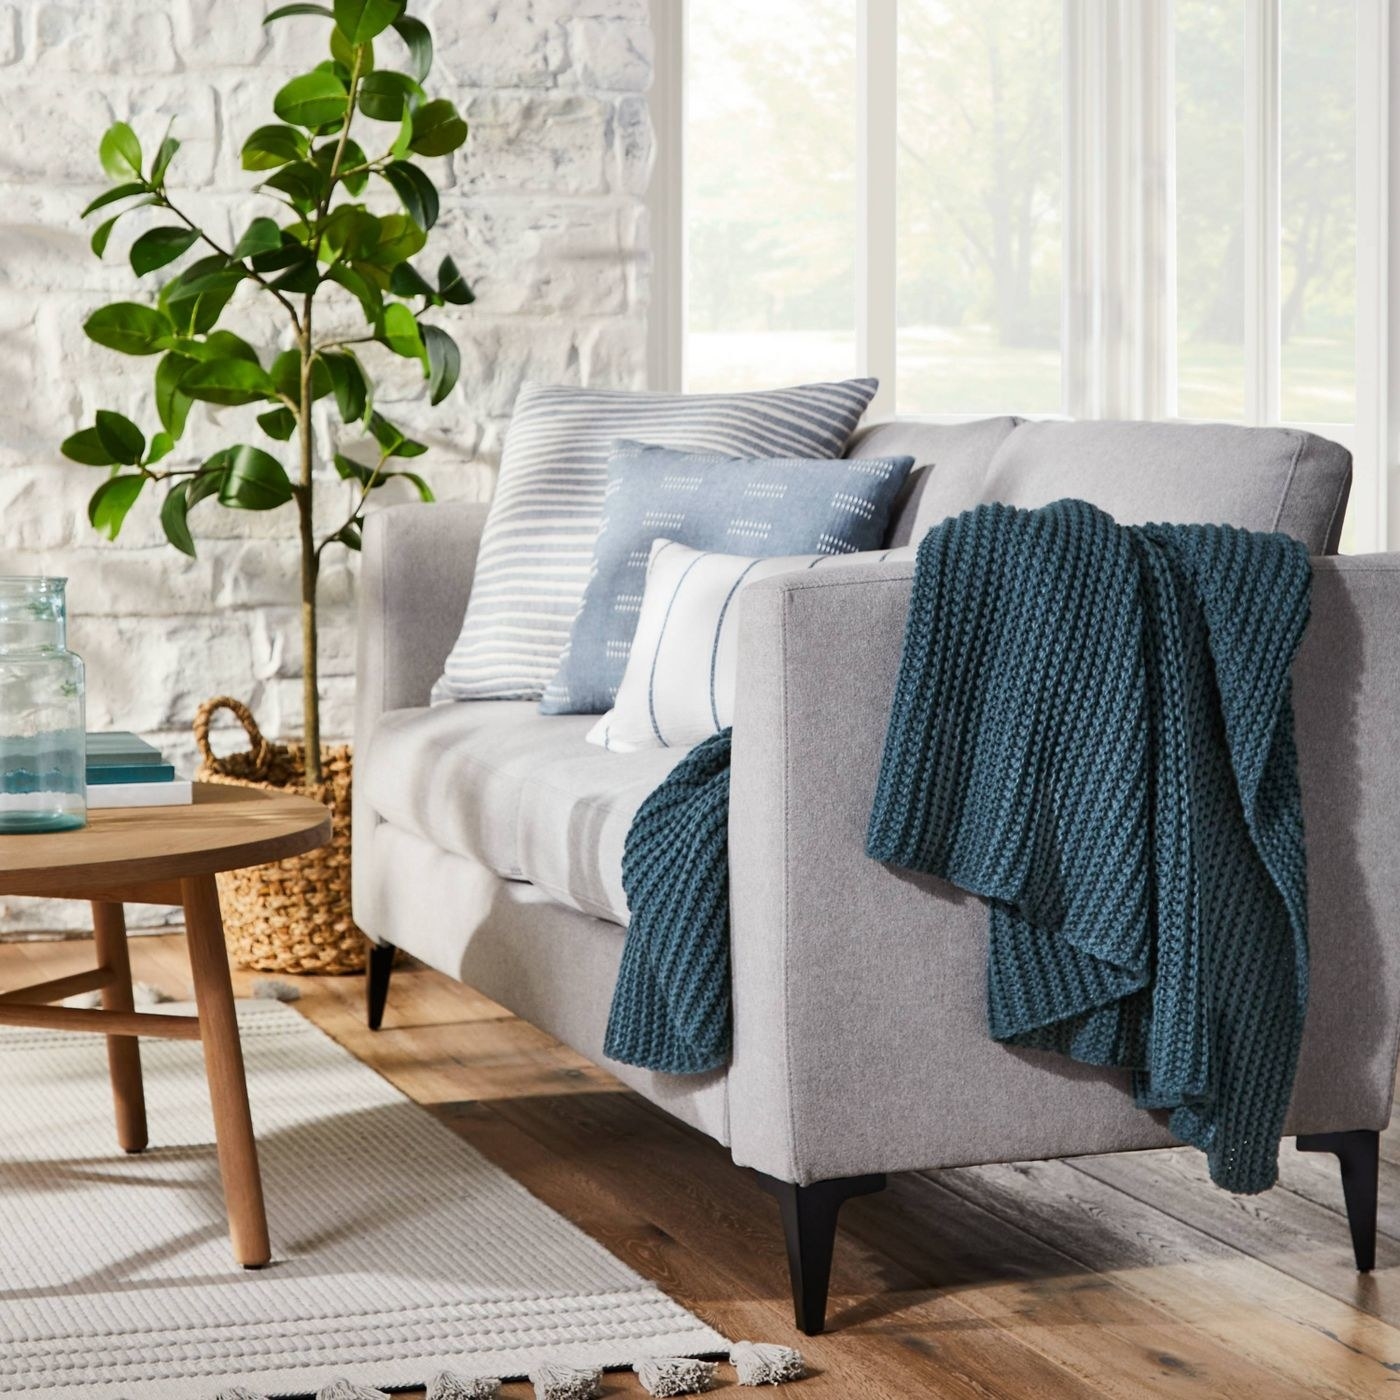 A grey sofa with a blue knit blanket